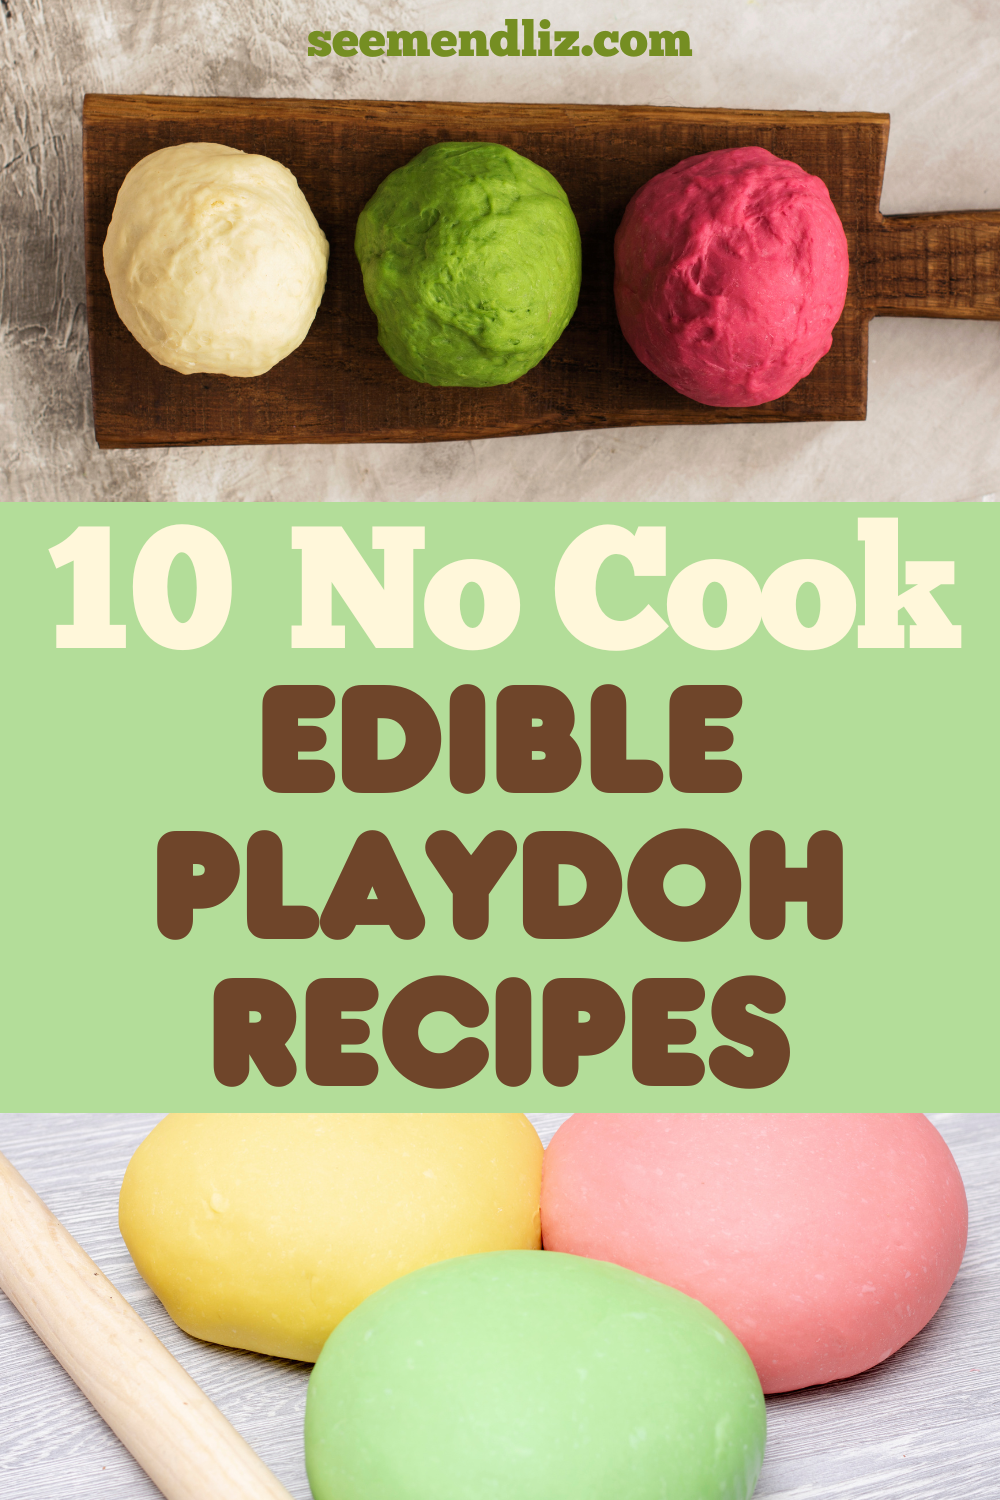 Taste-Safe Playdough Recipe for Babies and Toddlers - Happy